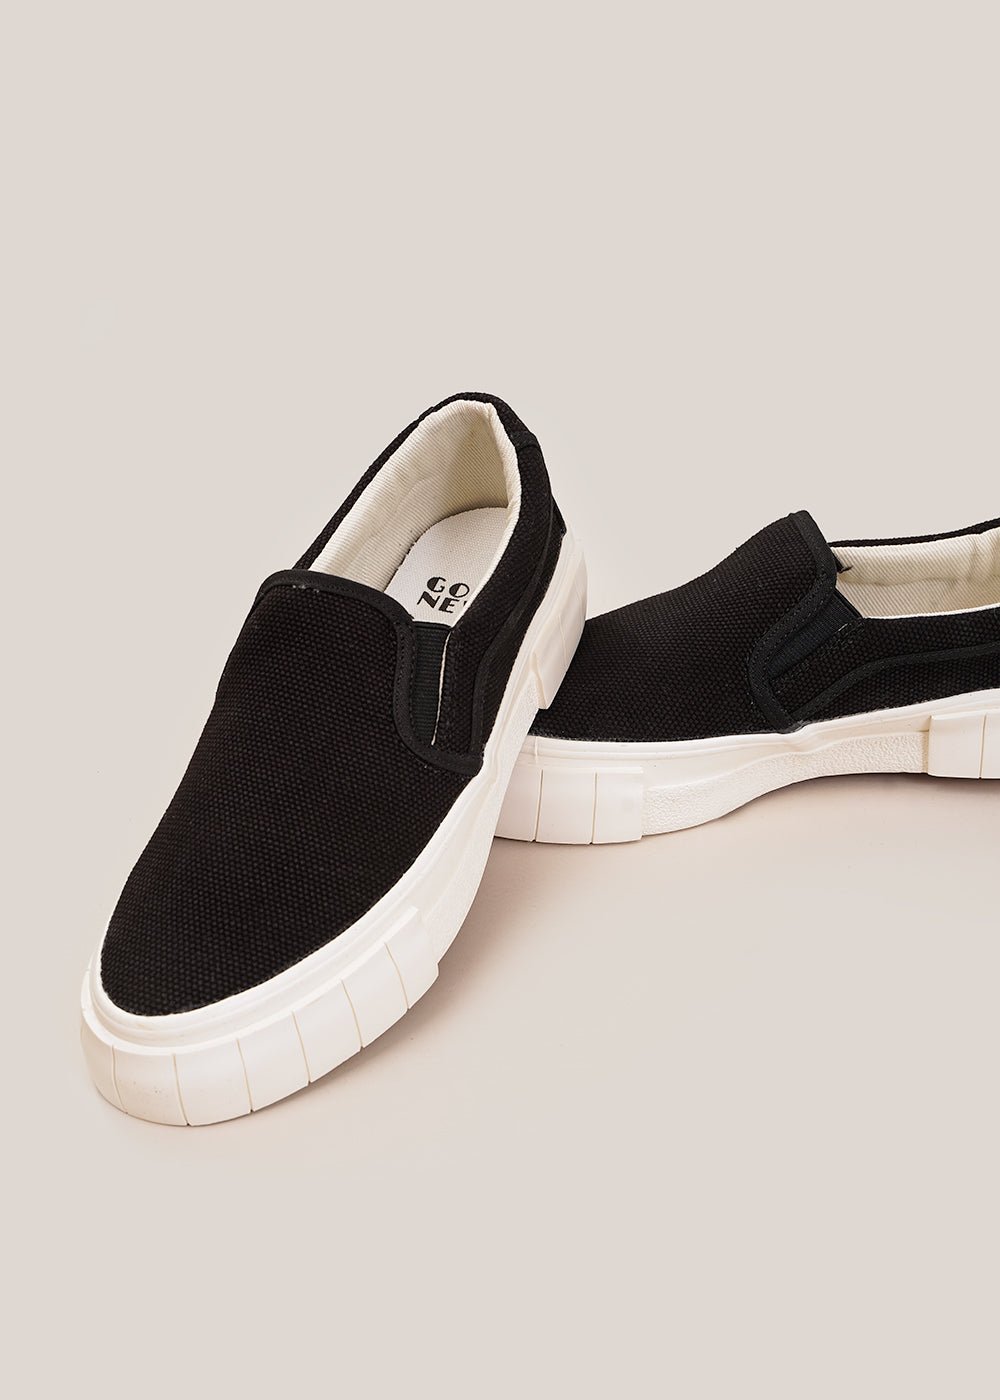 GOOD NEWS Black Yess Core Sneakers - New Classics Studios Sustainable Ethical Fashion Canada